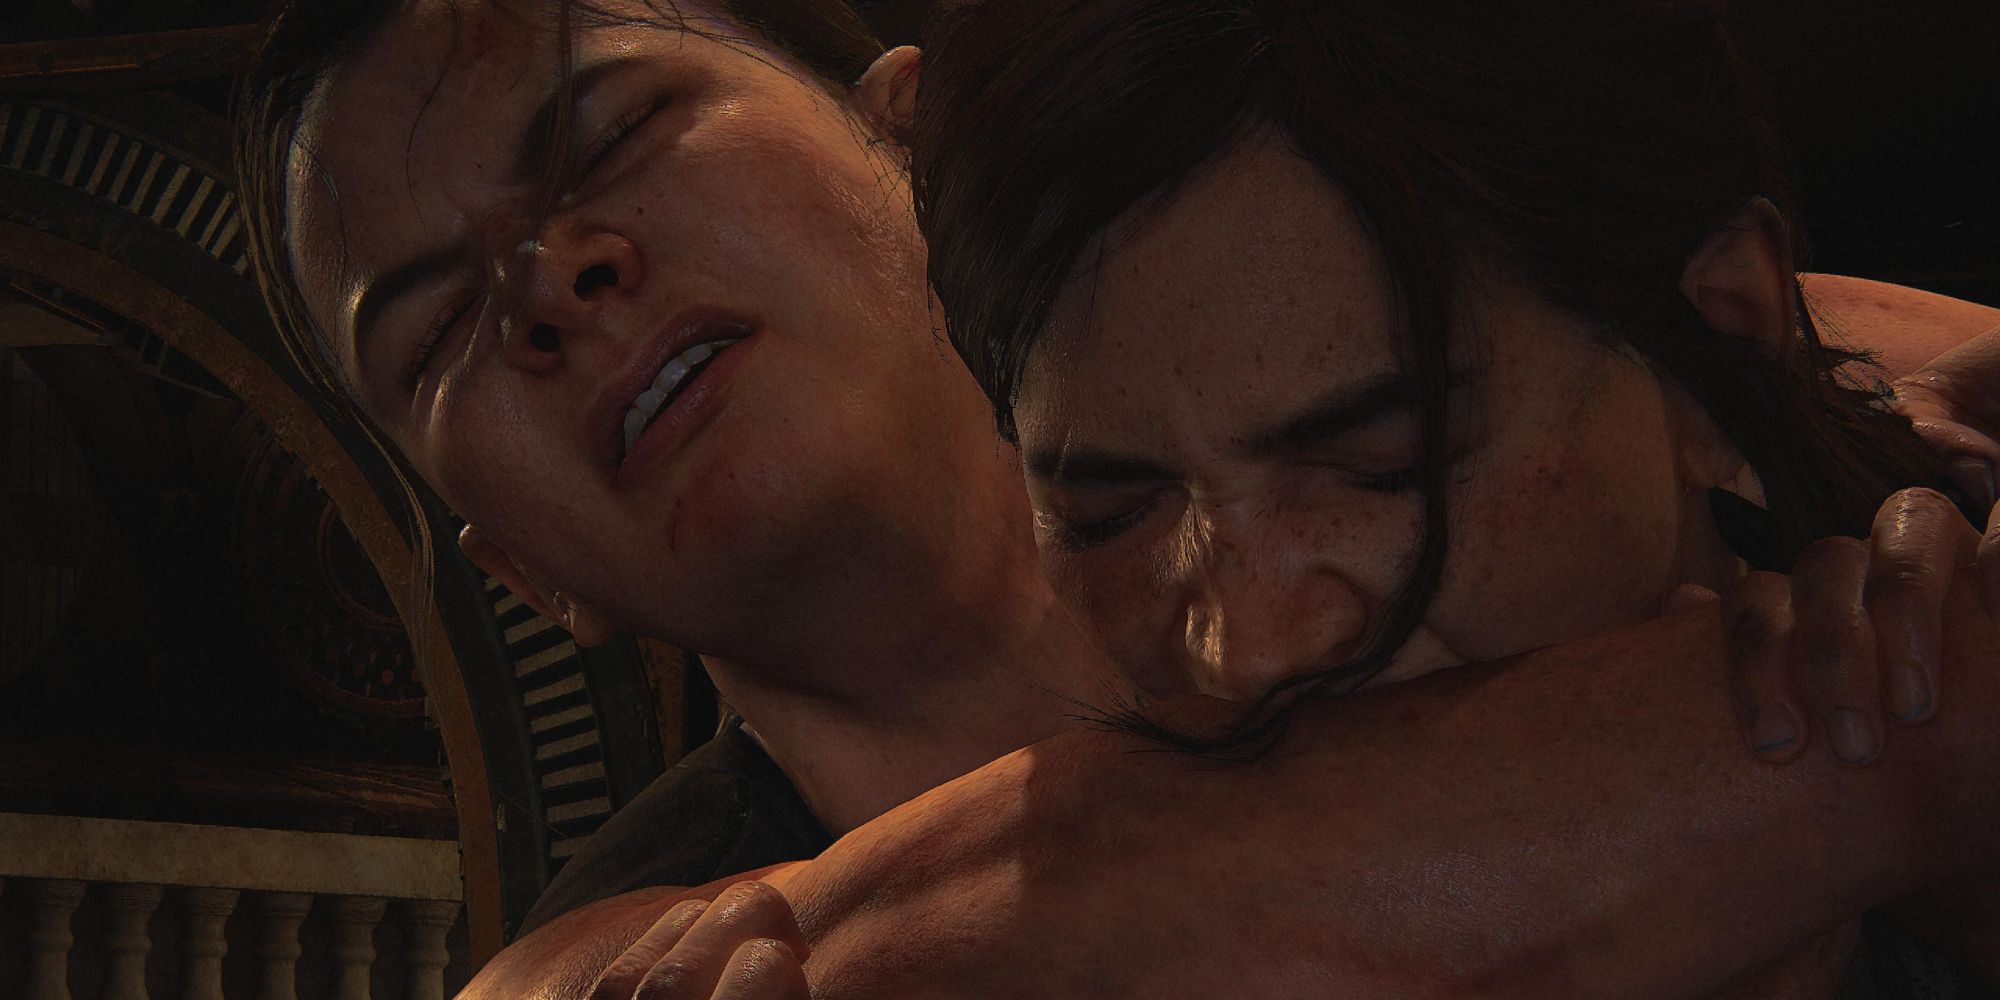 Ellie Biting Abby's arm in The Last of Us Part 2.